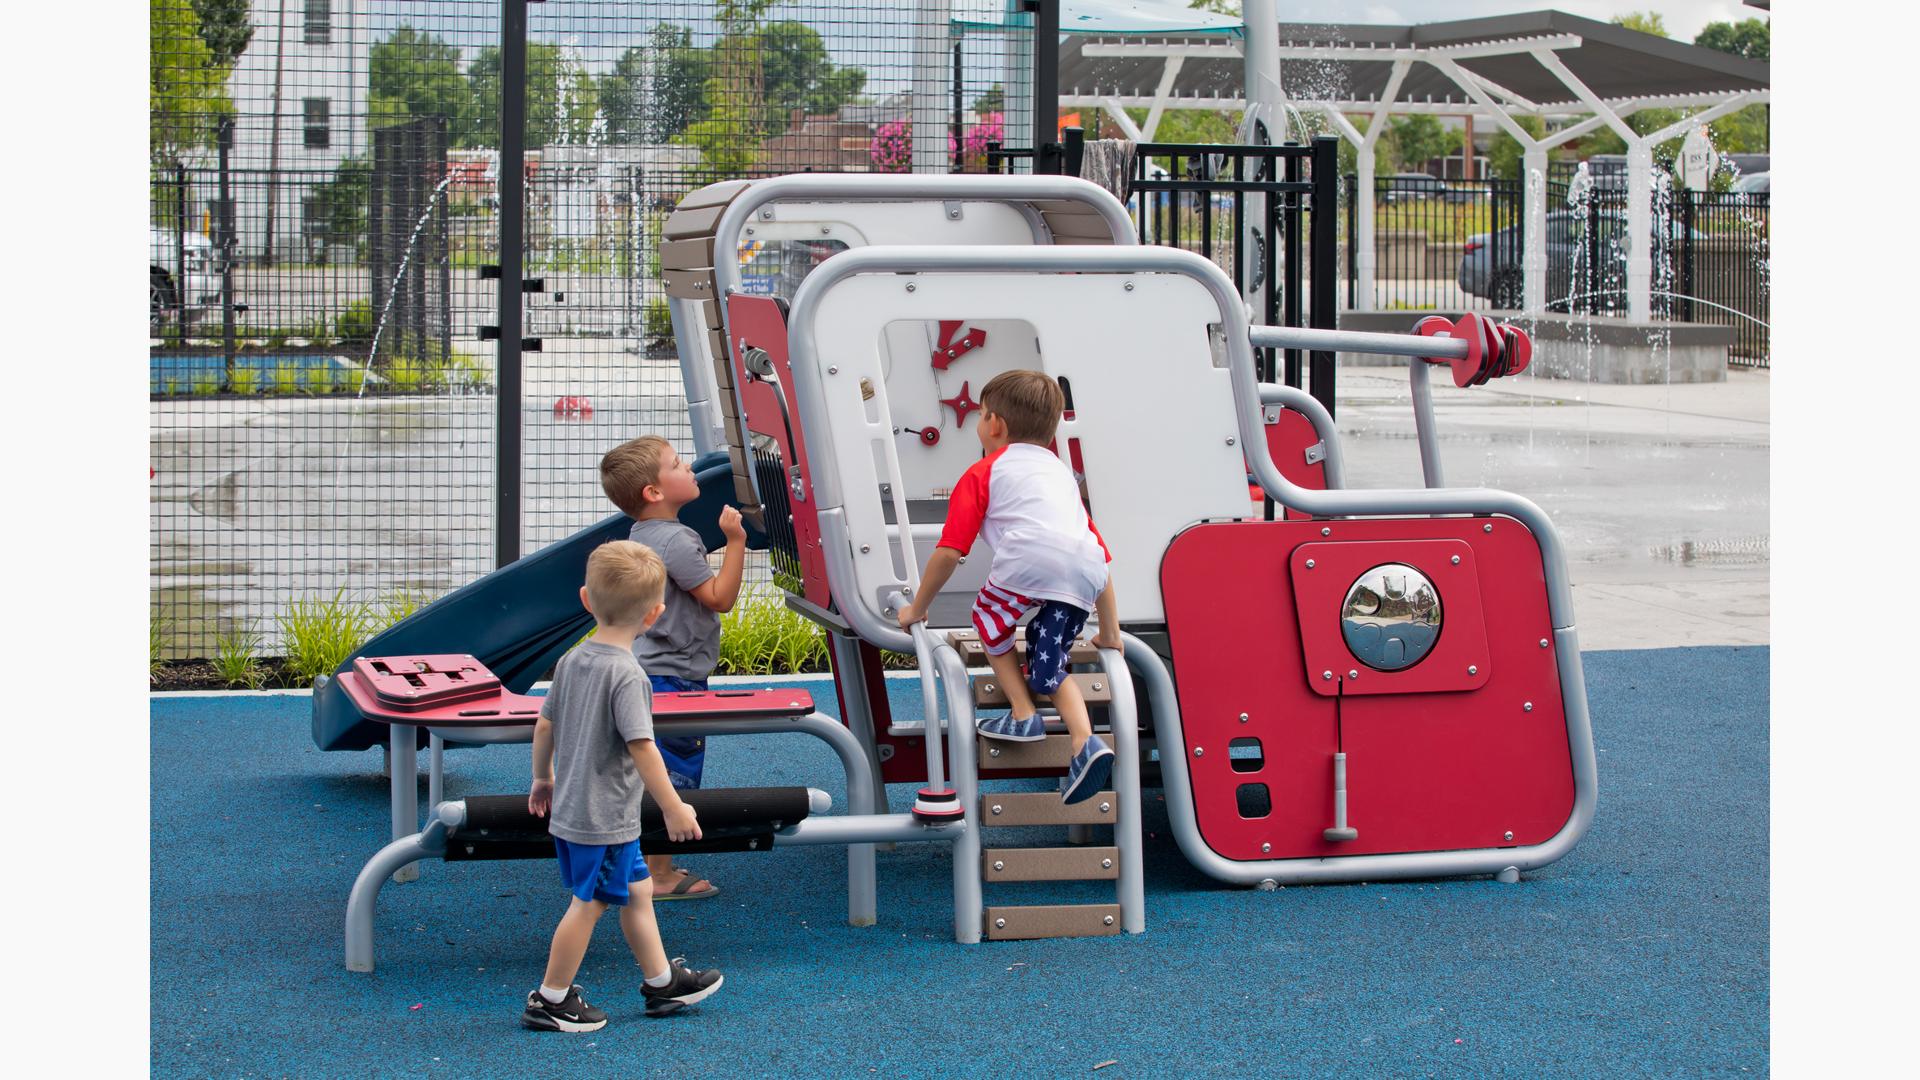 3 boys in playing on 2-5 smartplay structure